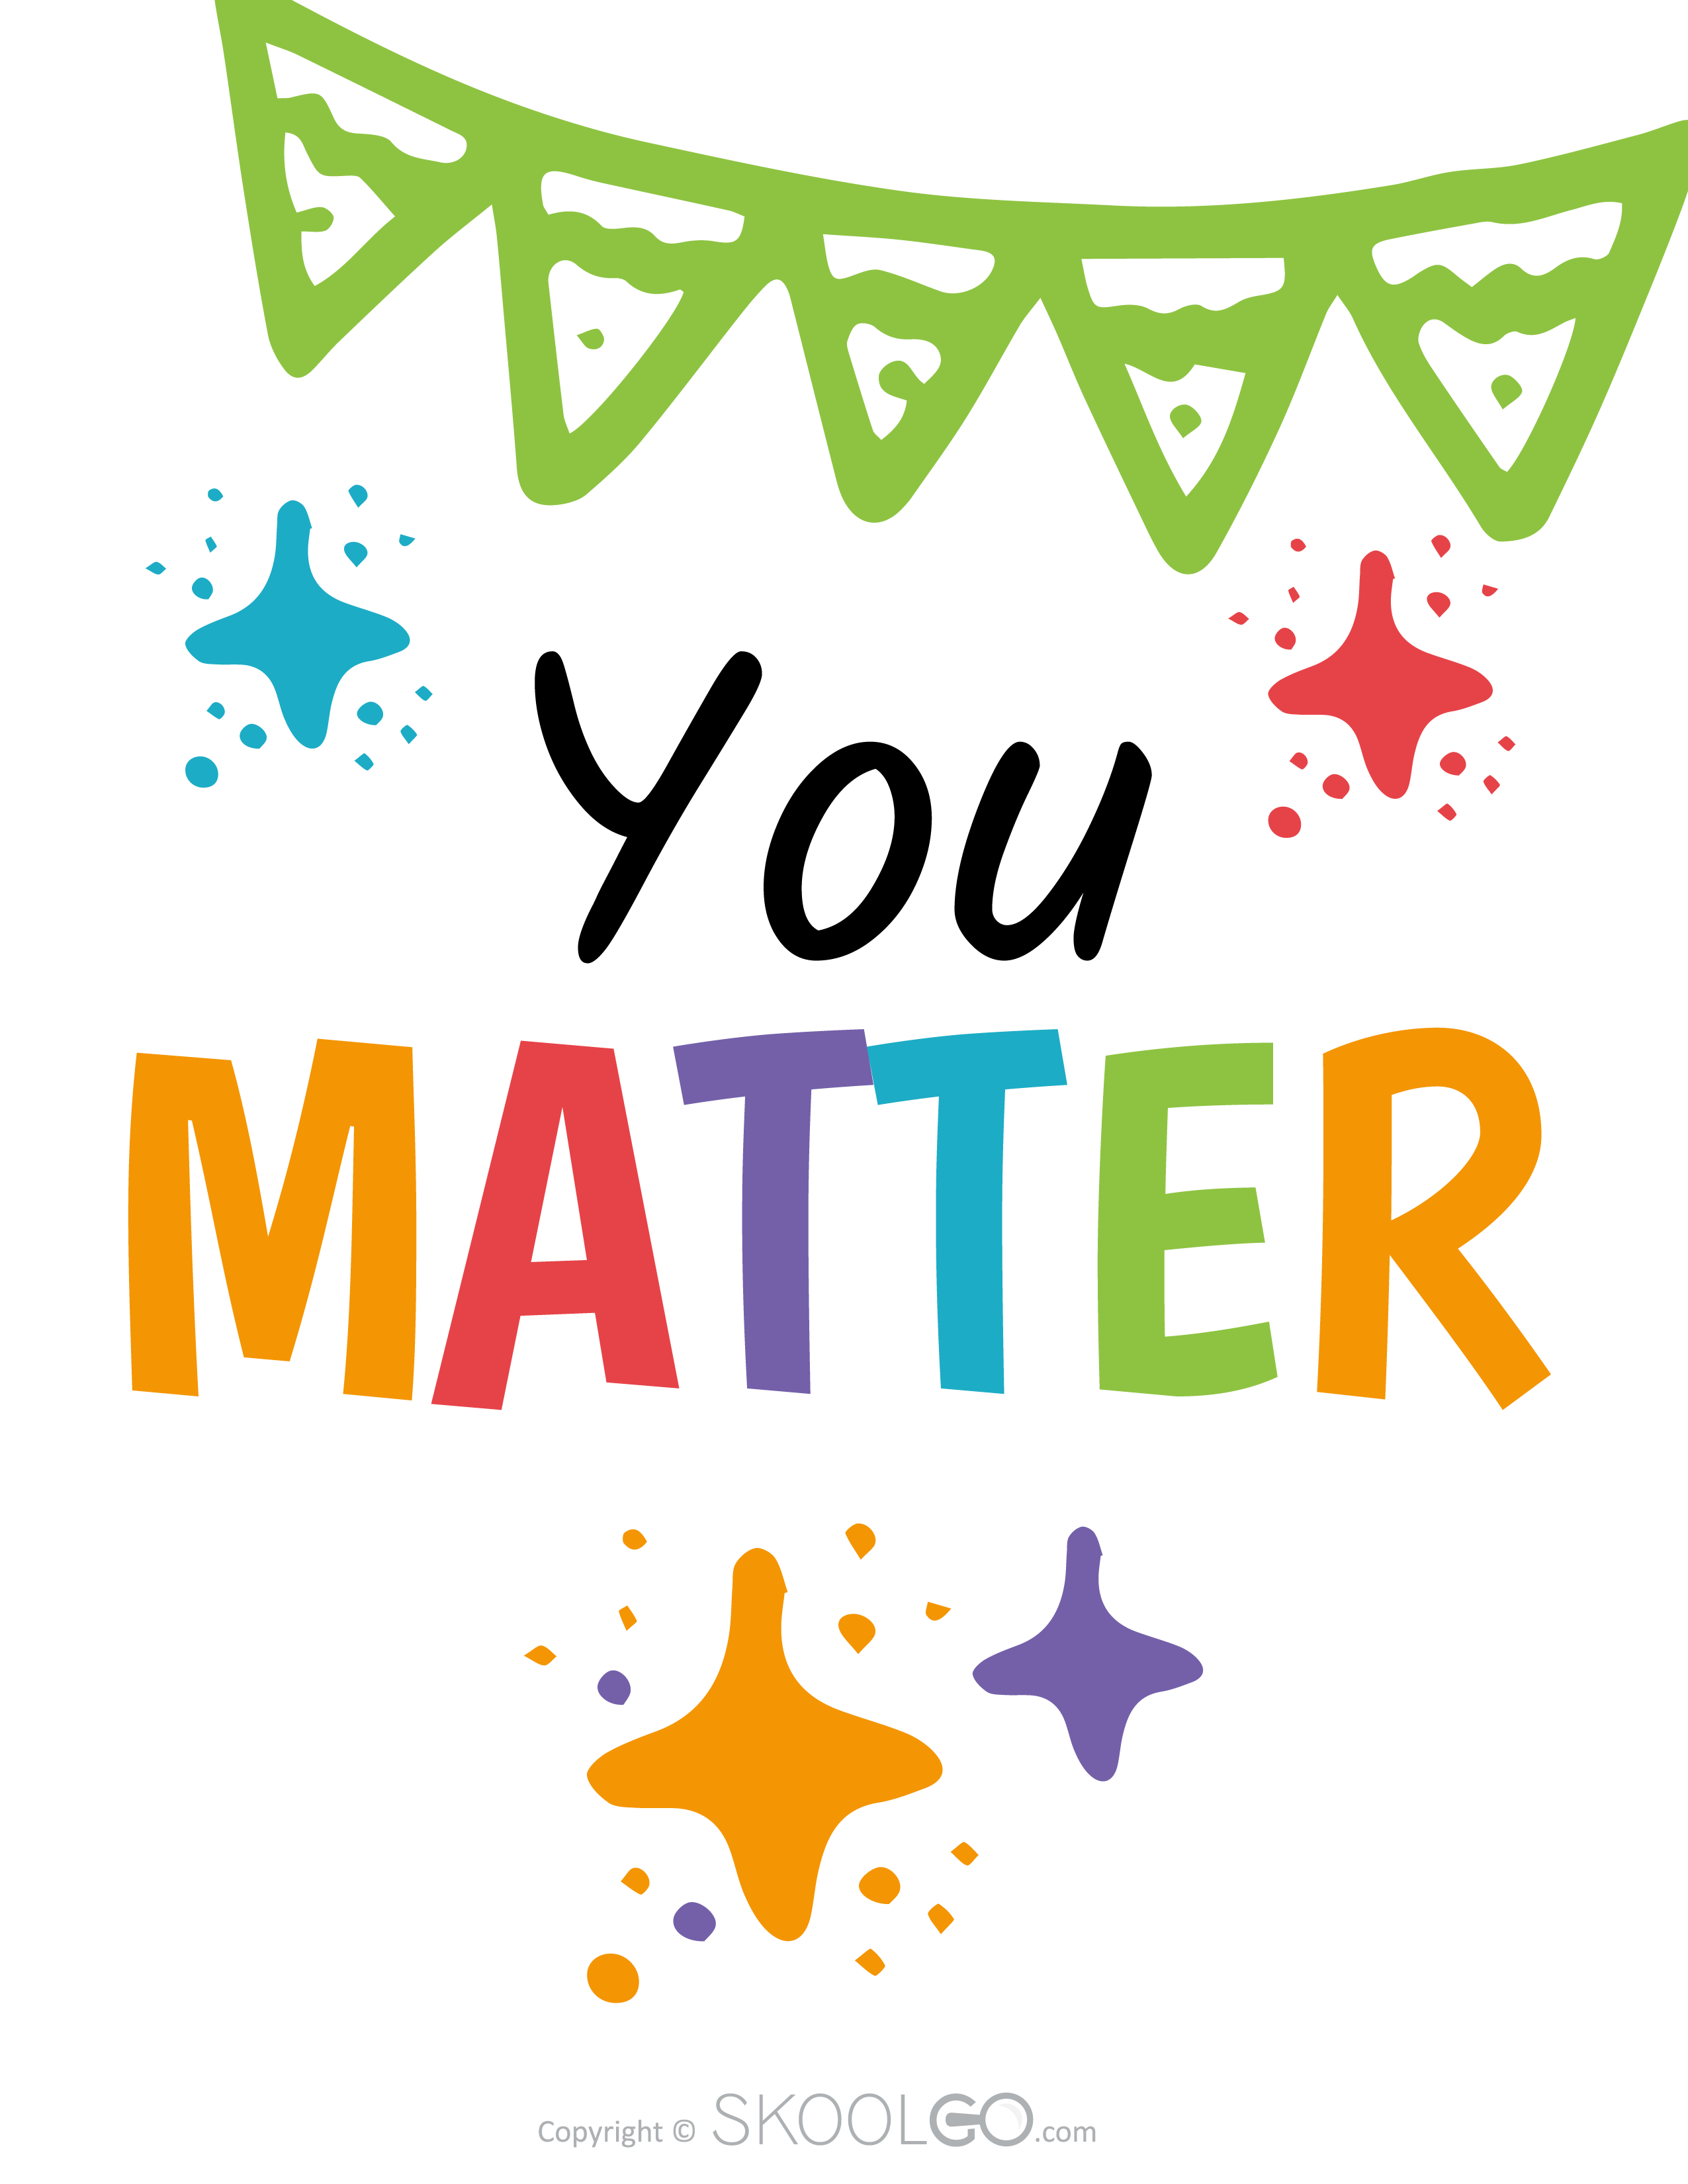 You Matter - Free Poster